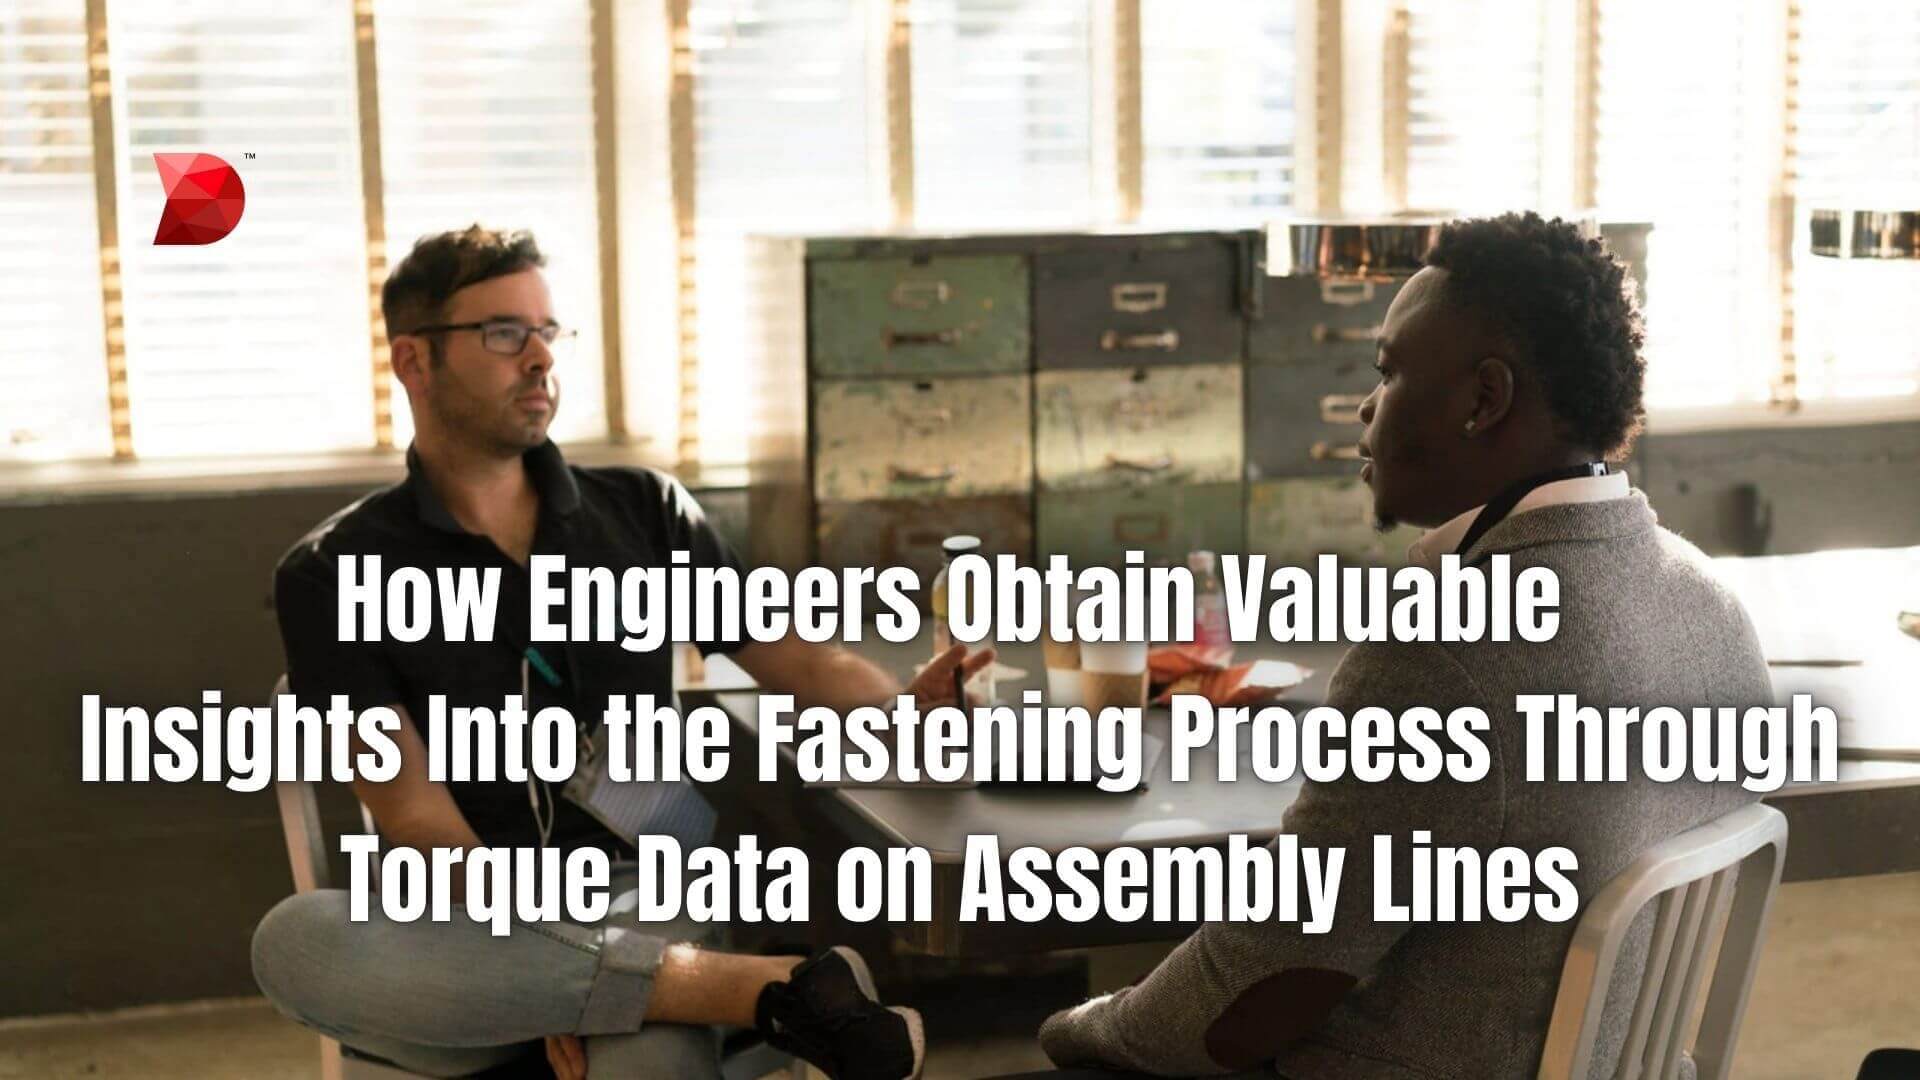 How Engineers Obtain Valuable Insights Into the Fastening Process Through Torque Data on Assembly Lines